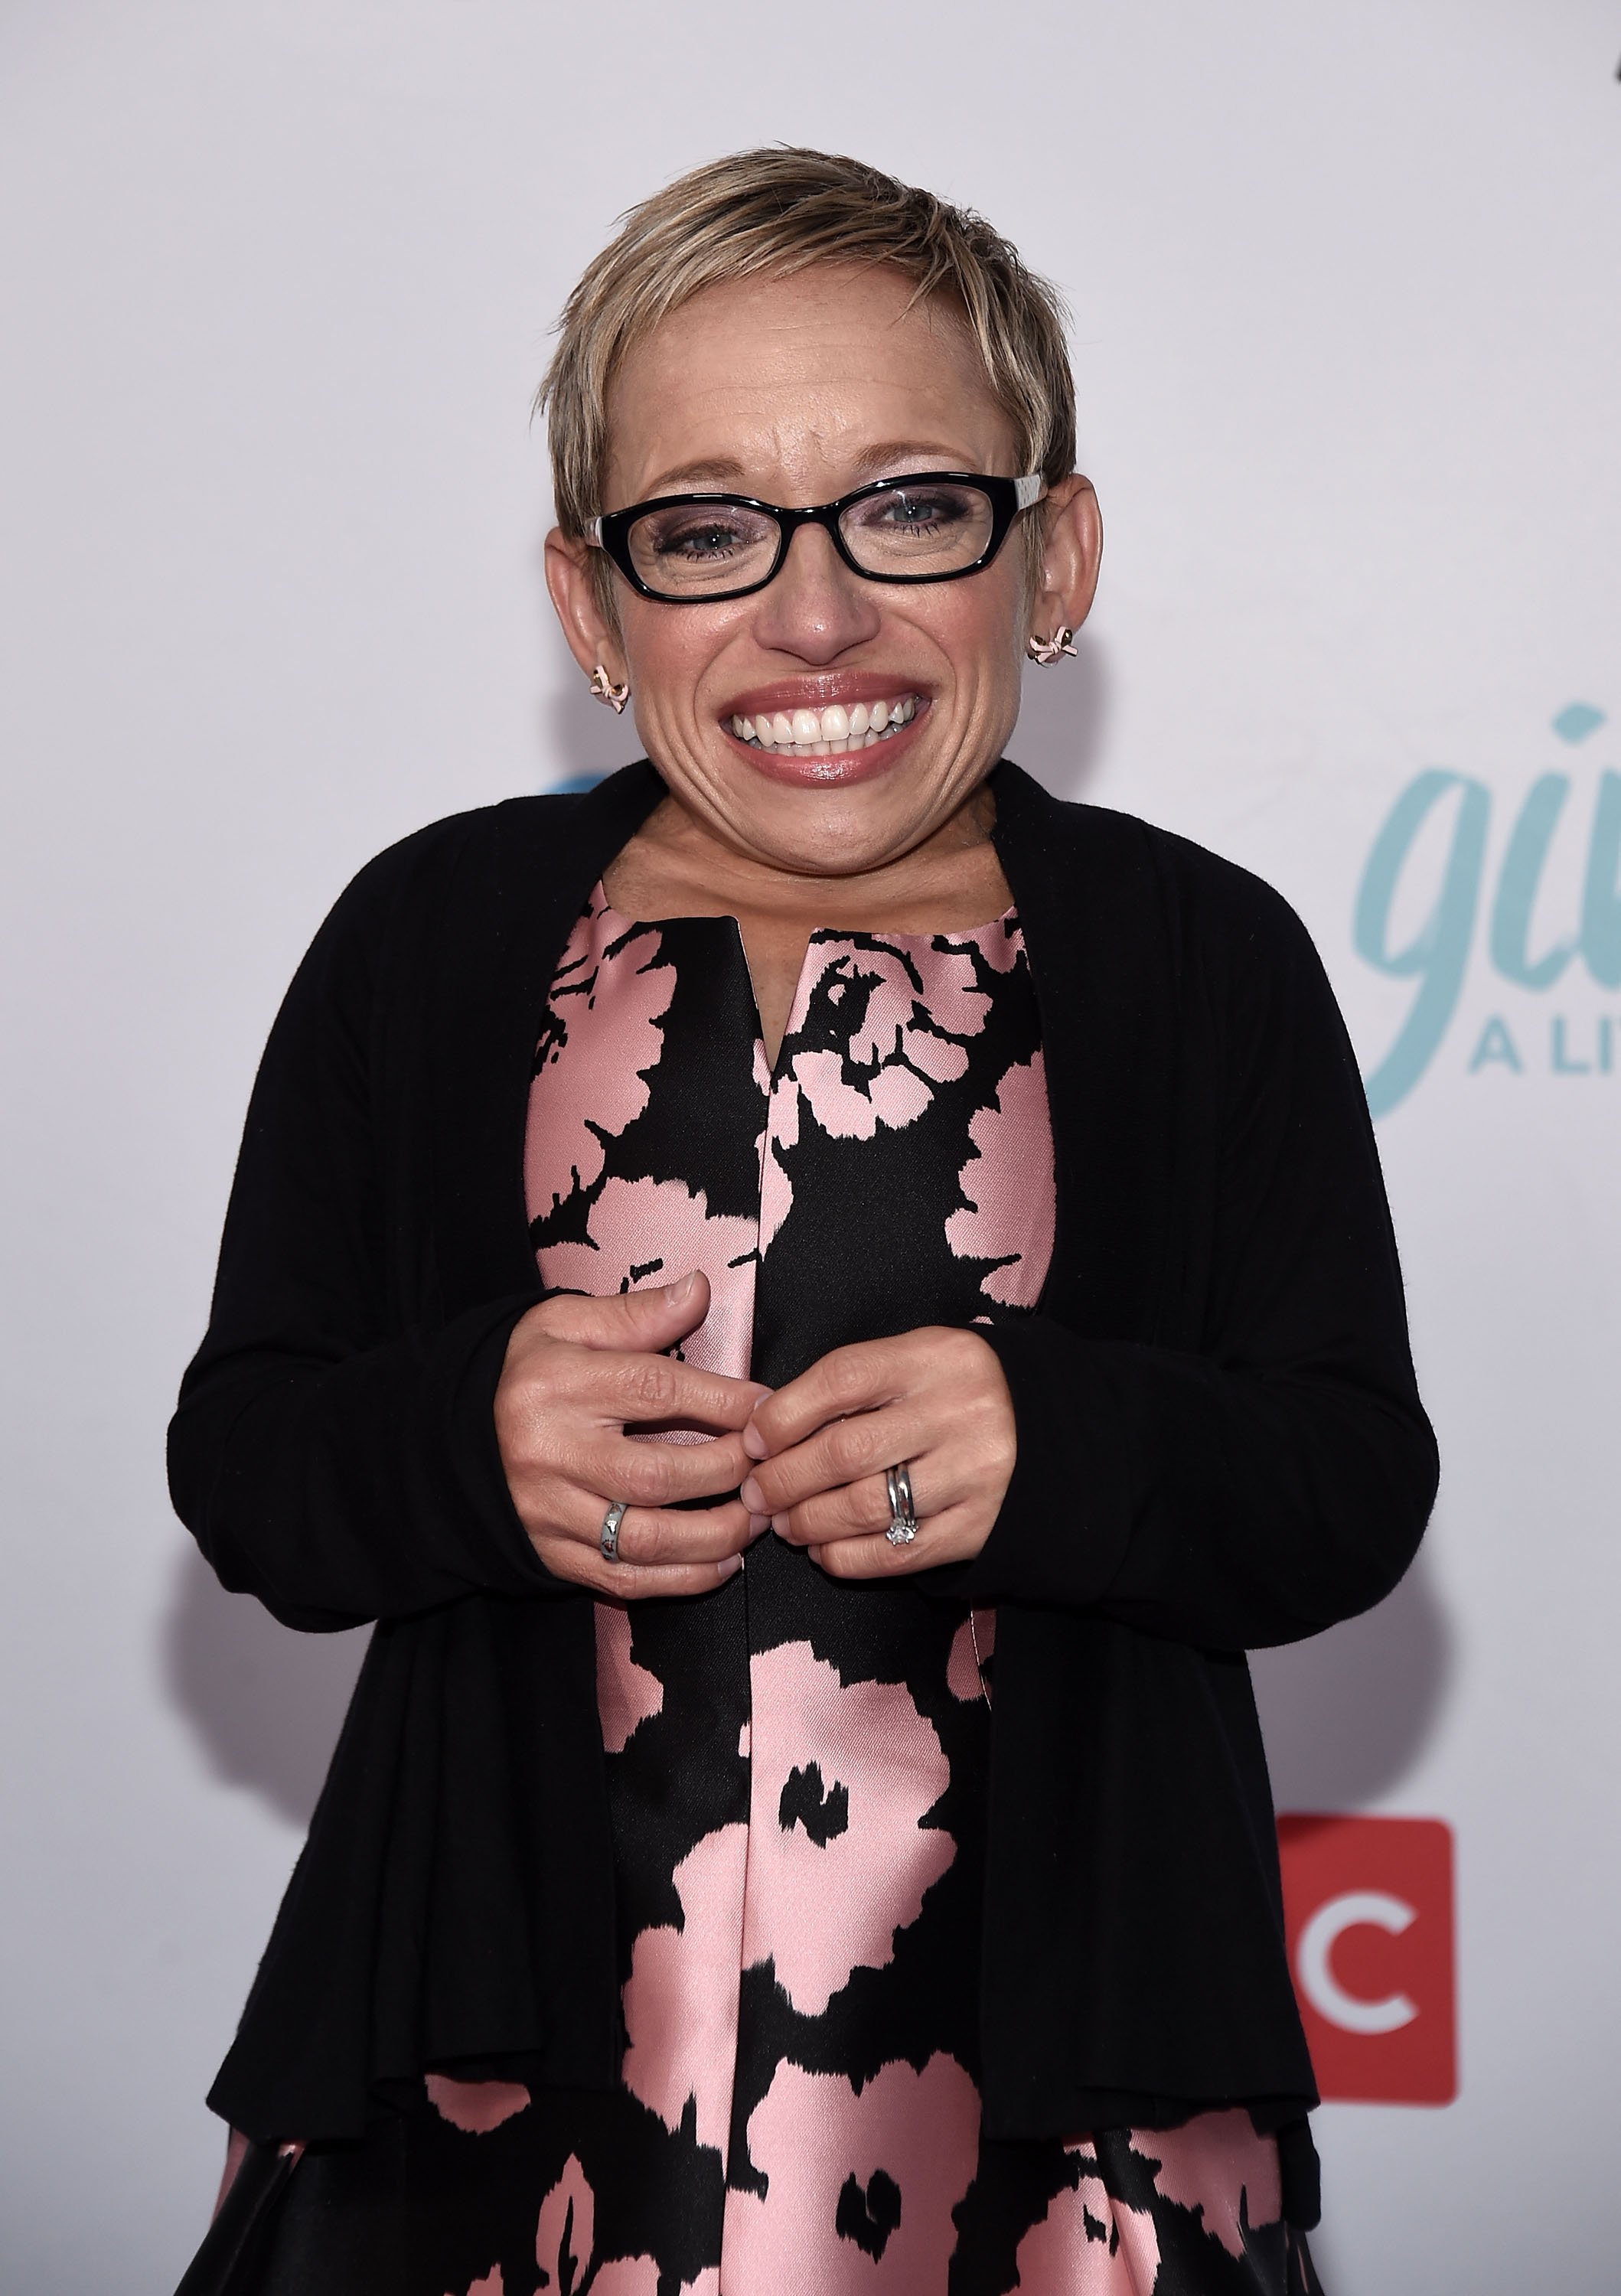 Jennifer Arnold attends the Give A Little Awards in Los Angeles, California on September 27, 2017 | Photo: Getty Images